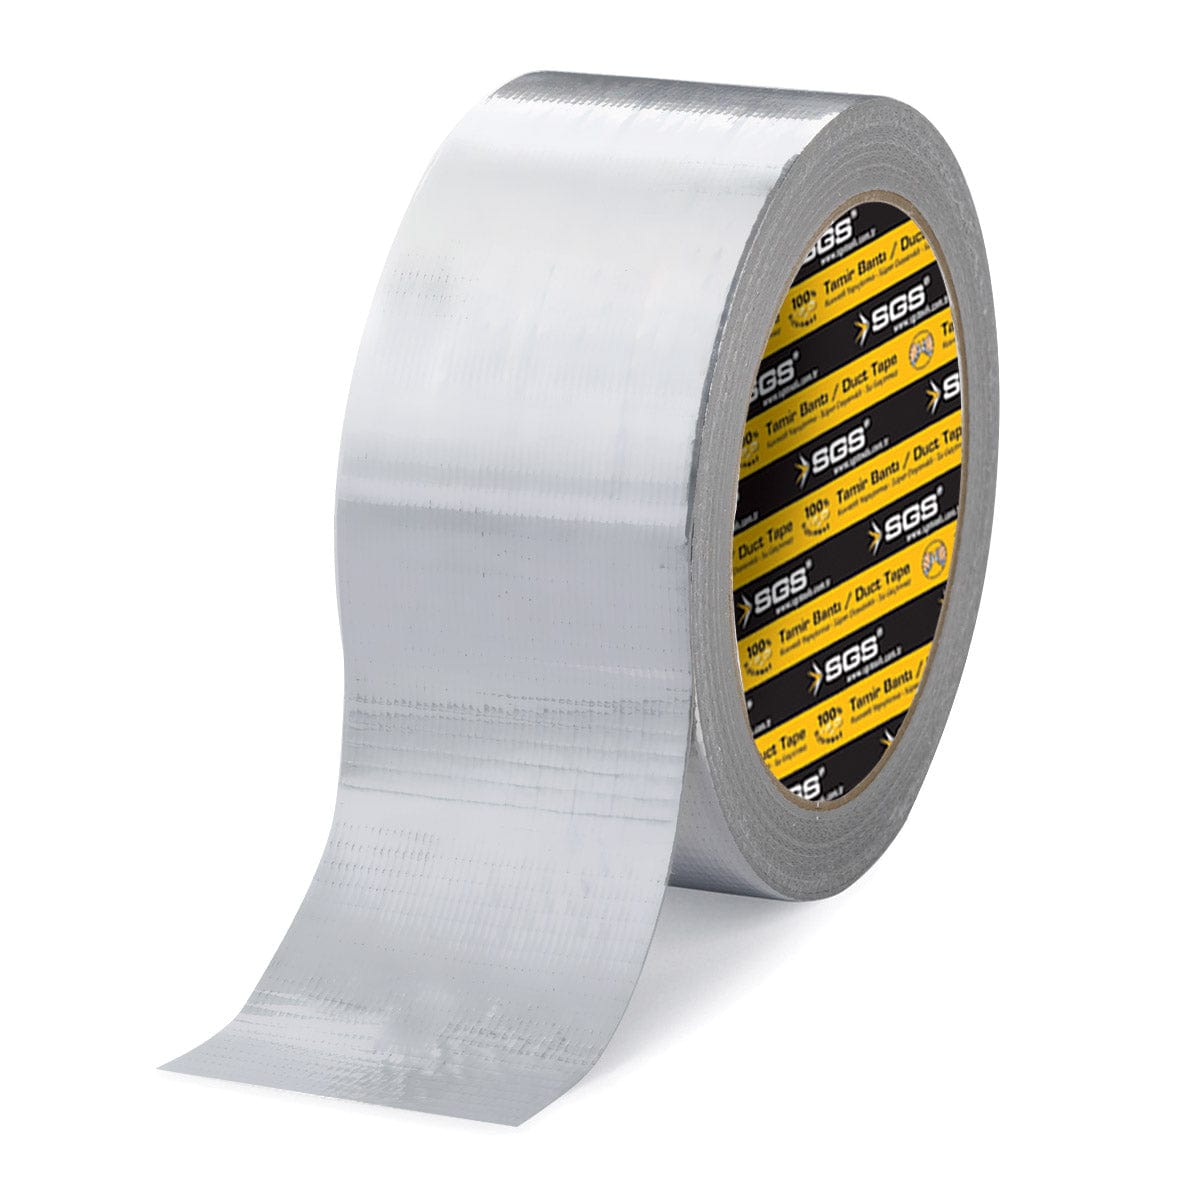 SGS Multifunction Grey Duct Tape 48mm x 10m - SGS1221 | Supply Master | Accra, Ghana Extension Cords & Accessories Buy Tools hardware Building materials